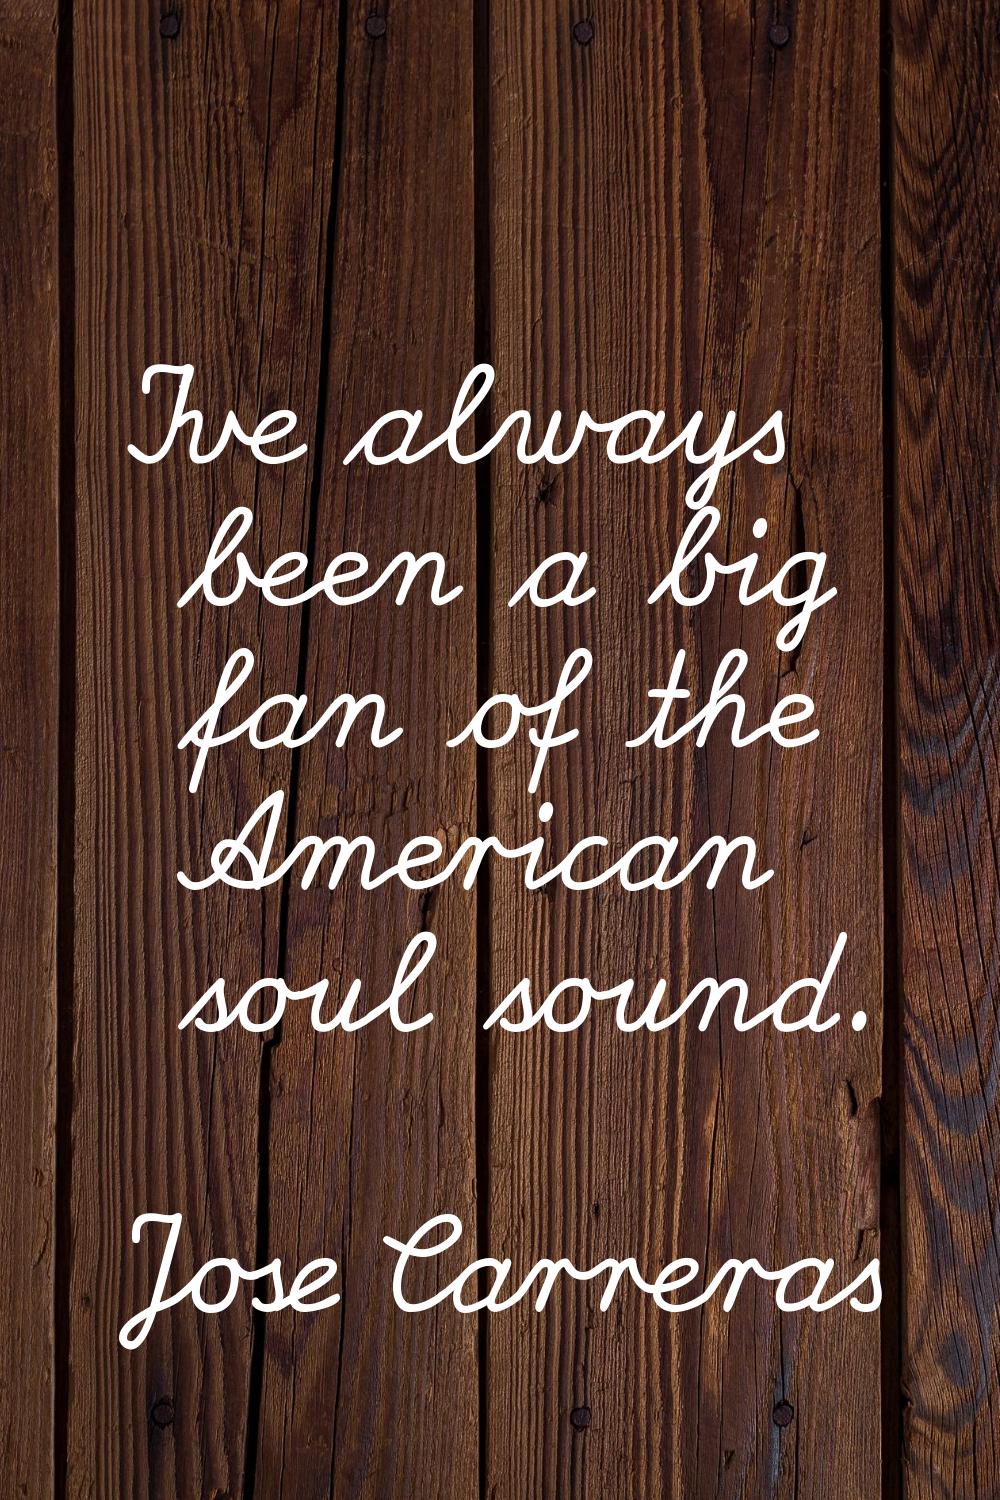 I've always been a big fan of the American soul sound.